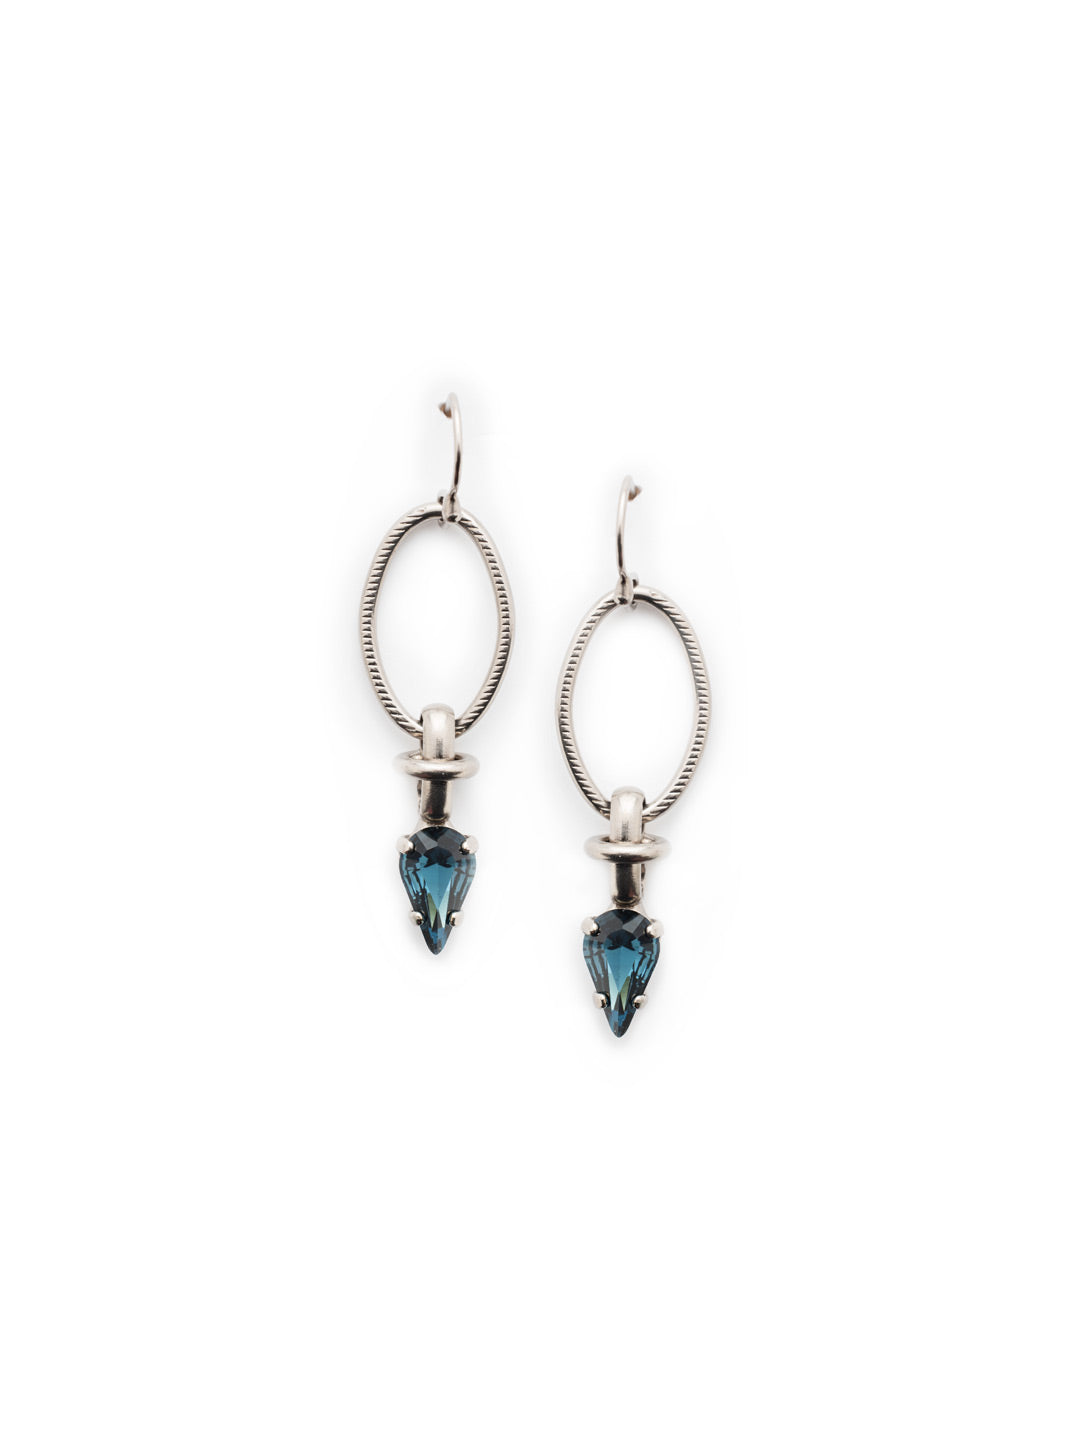 Zella Dangle Earrings - EEU70ASNFT - Sophisticated and original sums up our Zella Dangle Earrings. An embossed metal hoop gives way to a signature sparkling crystal that gets to the stylish point. From Sorrelli's Night Frost collection in our Antique Silver-tone finish.